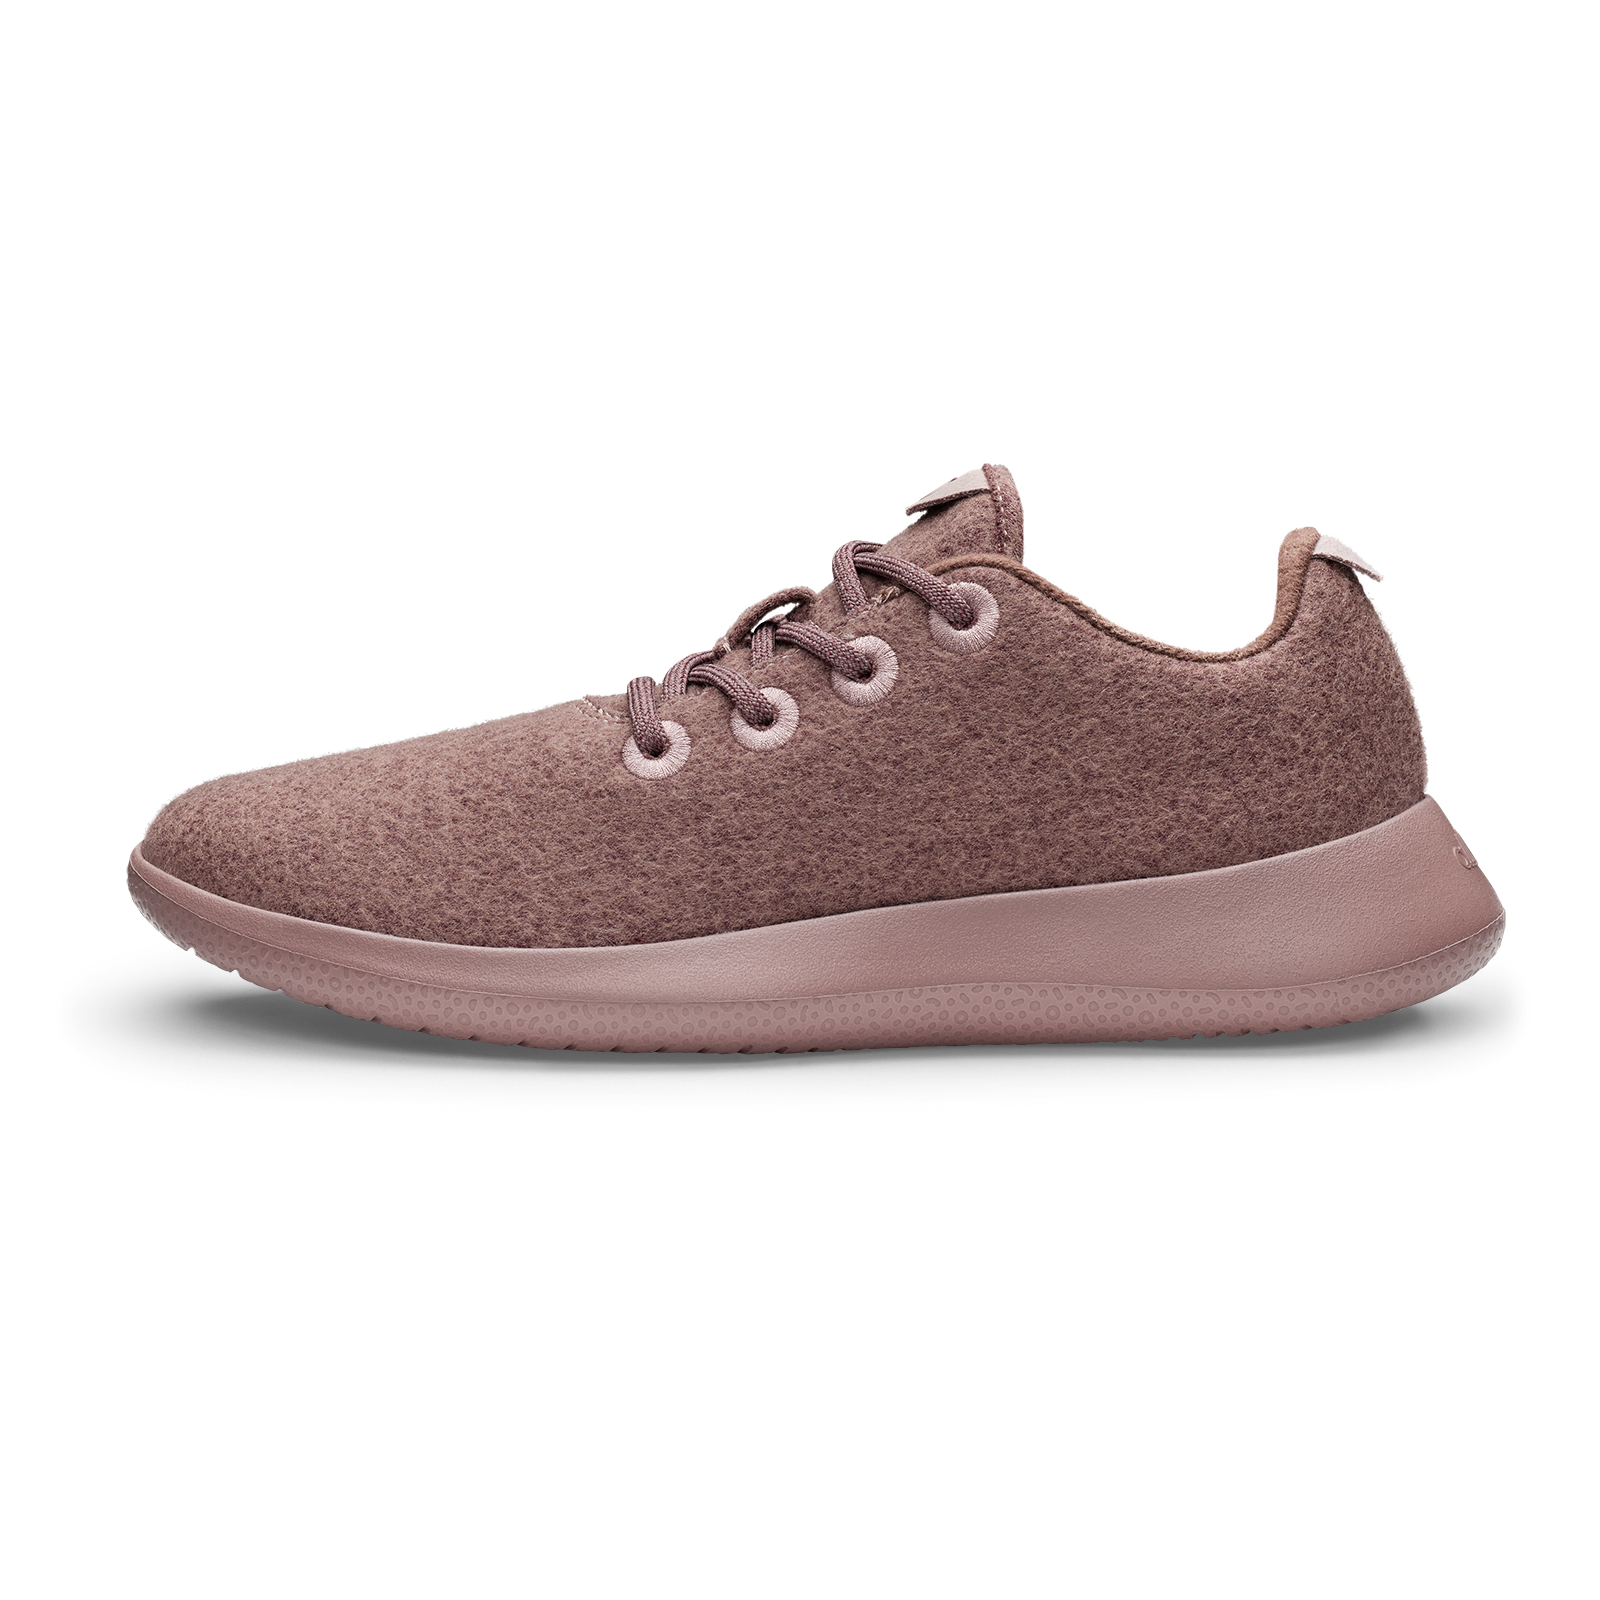 Men's Wool Runners - Stormy Mauve (Stormy Mauve Sole)